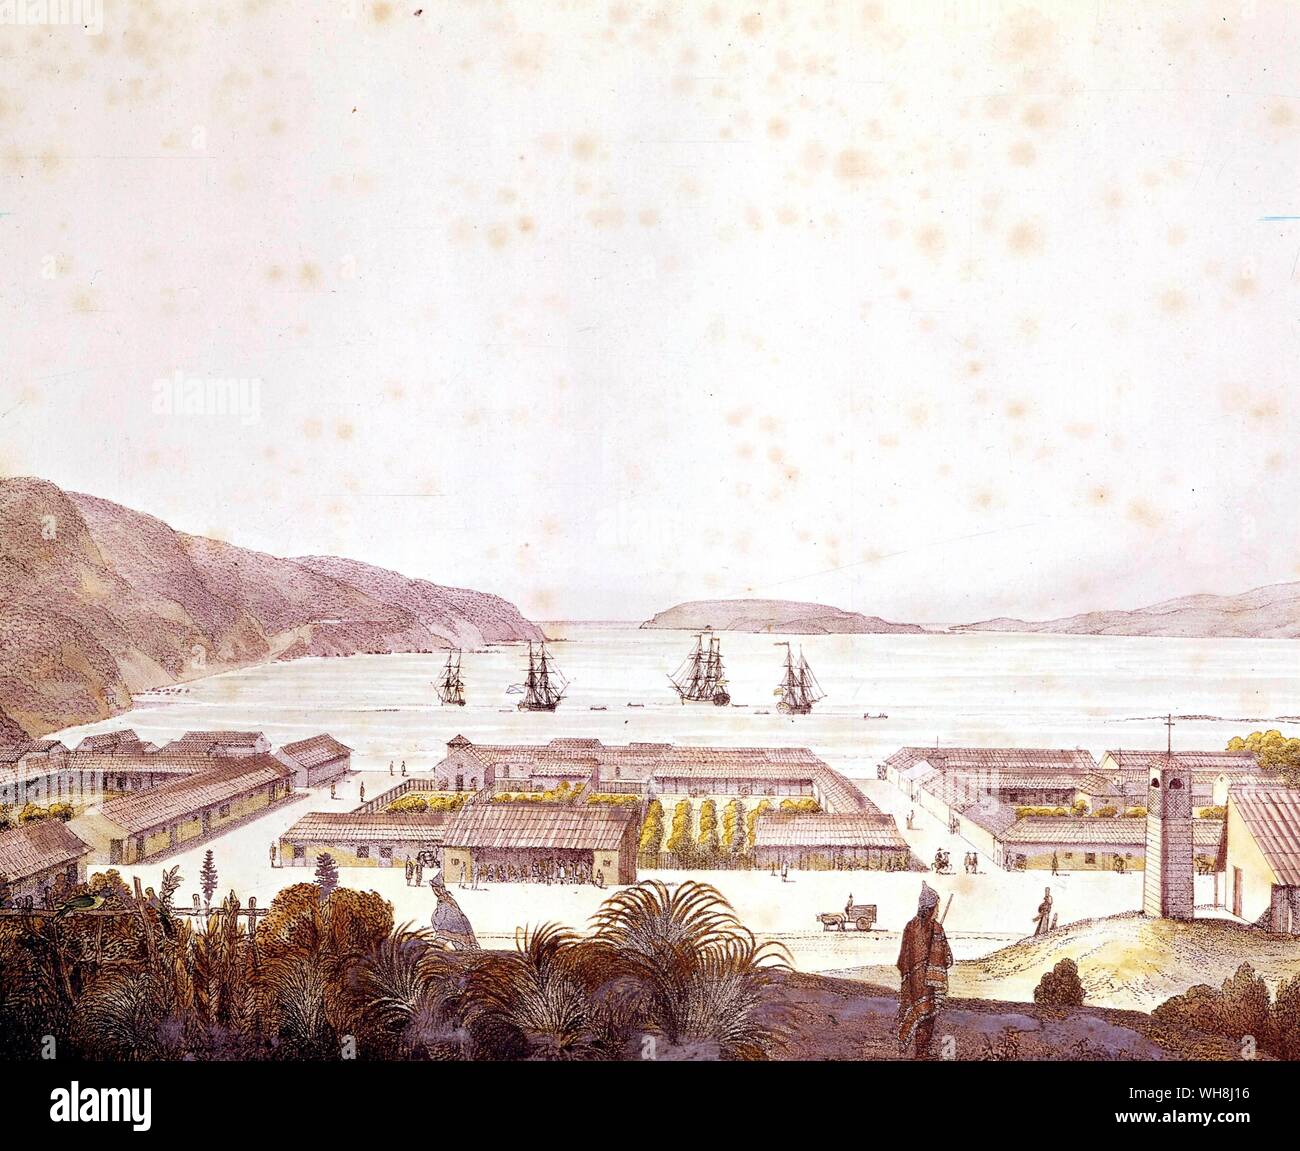 The town of Talcahuano and port of Concepcion. From Darwin and the Beagle by Alan Moorhead, page 171. Stock Photo